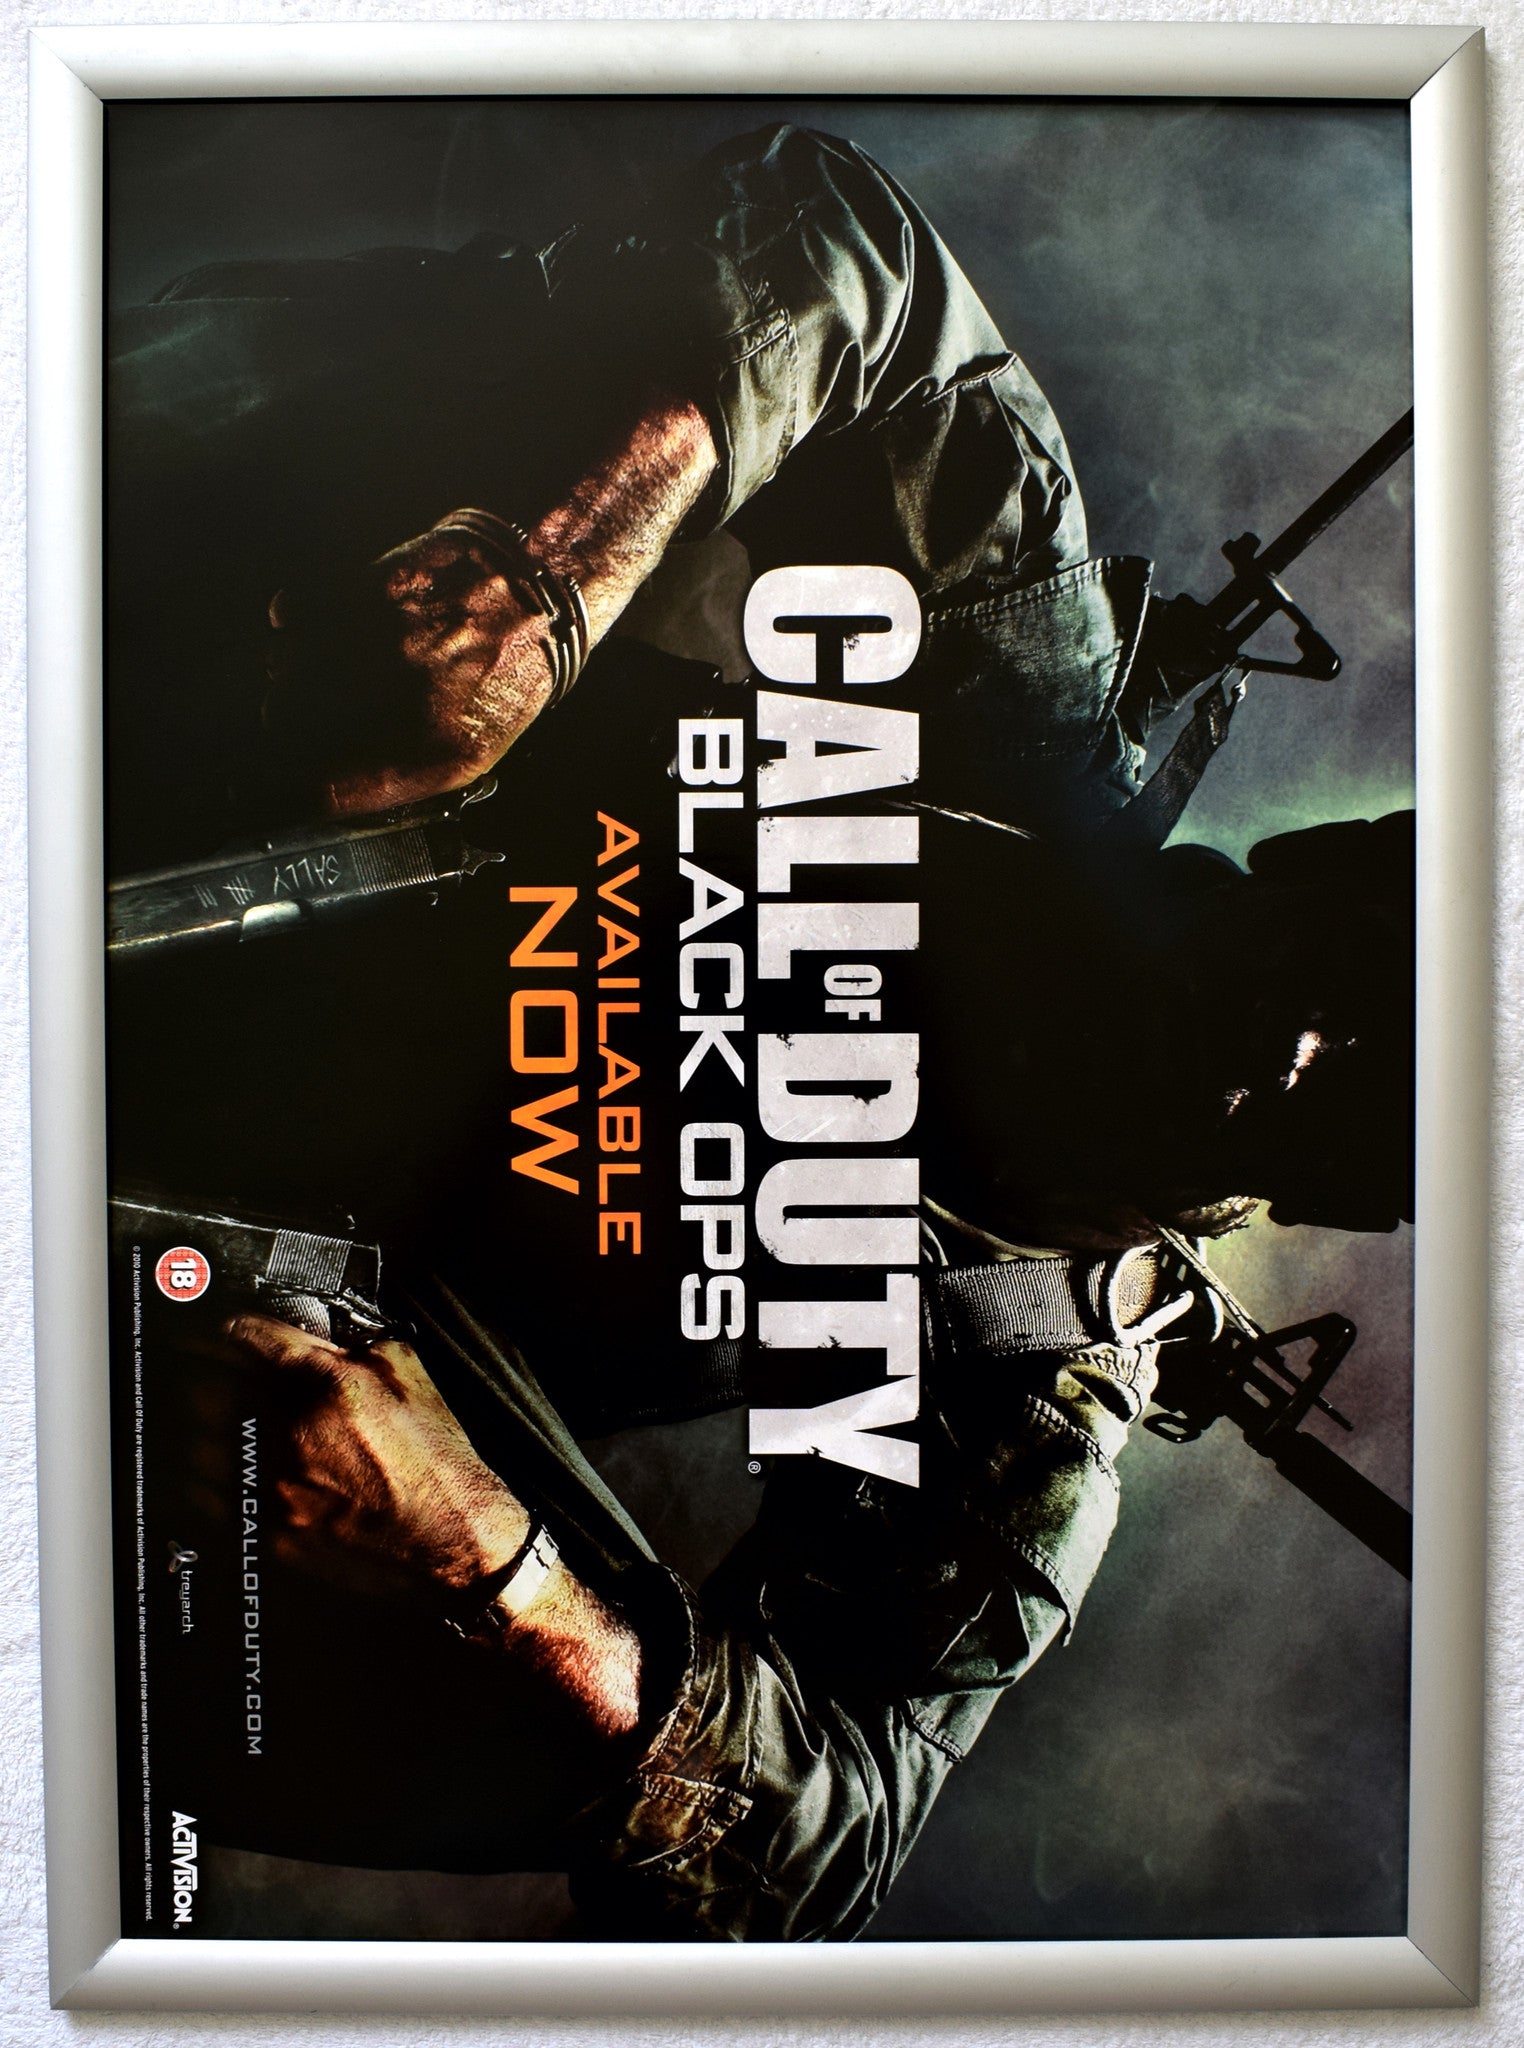 Call of Duty Black Ops (A2) Promotional Poster #3